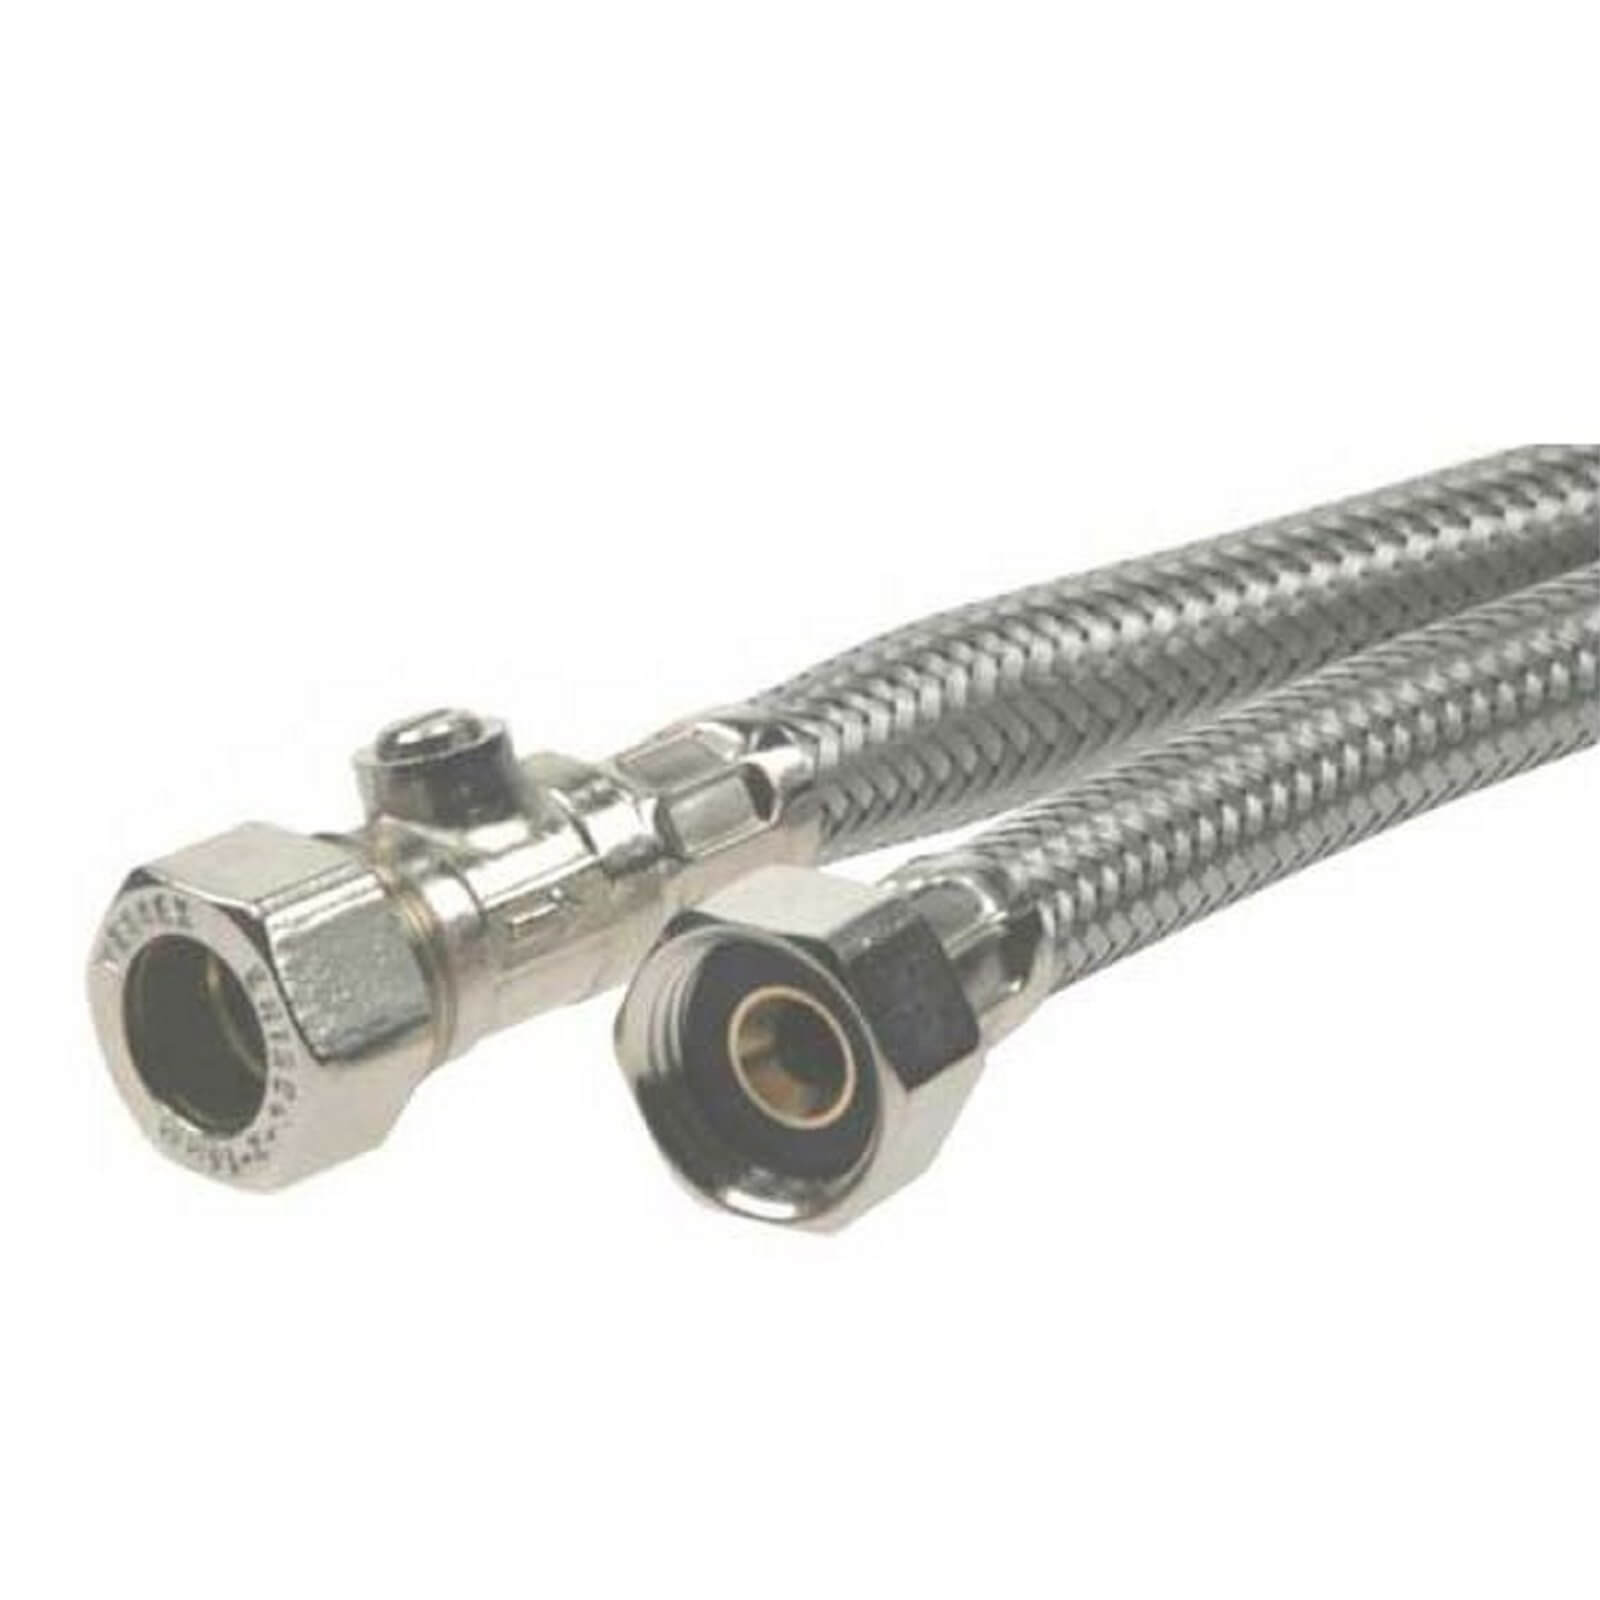 Photo of Compression Braided Tap Connector With Valve - 15mm - 0.5in